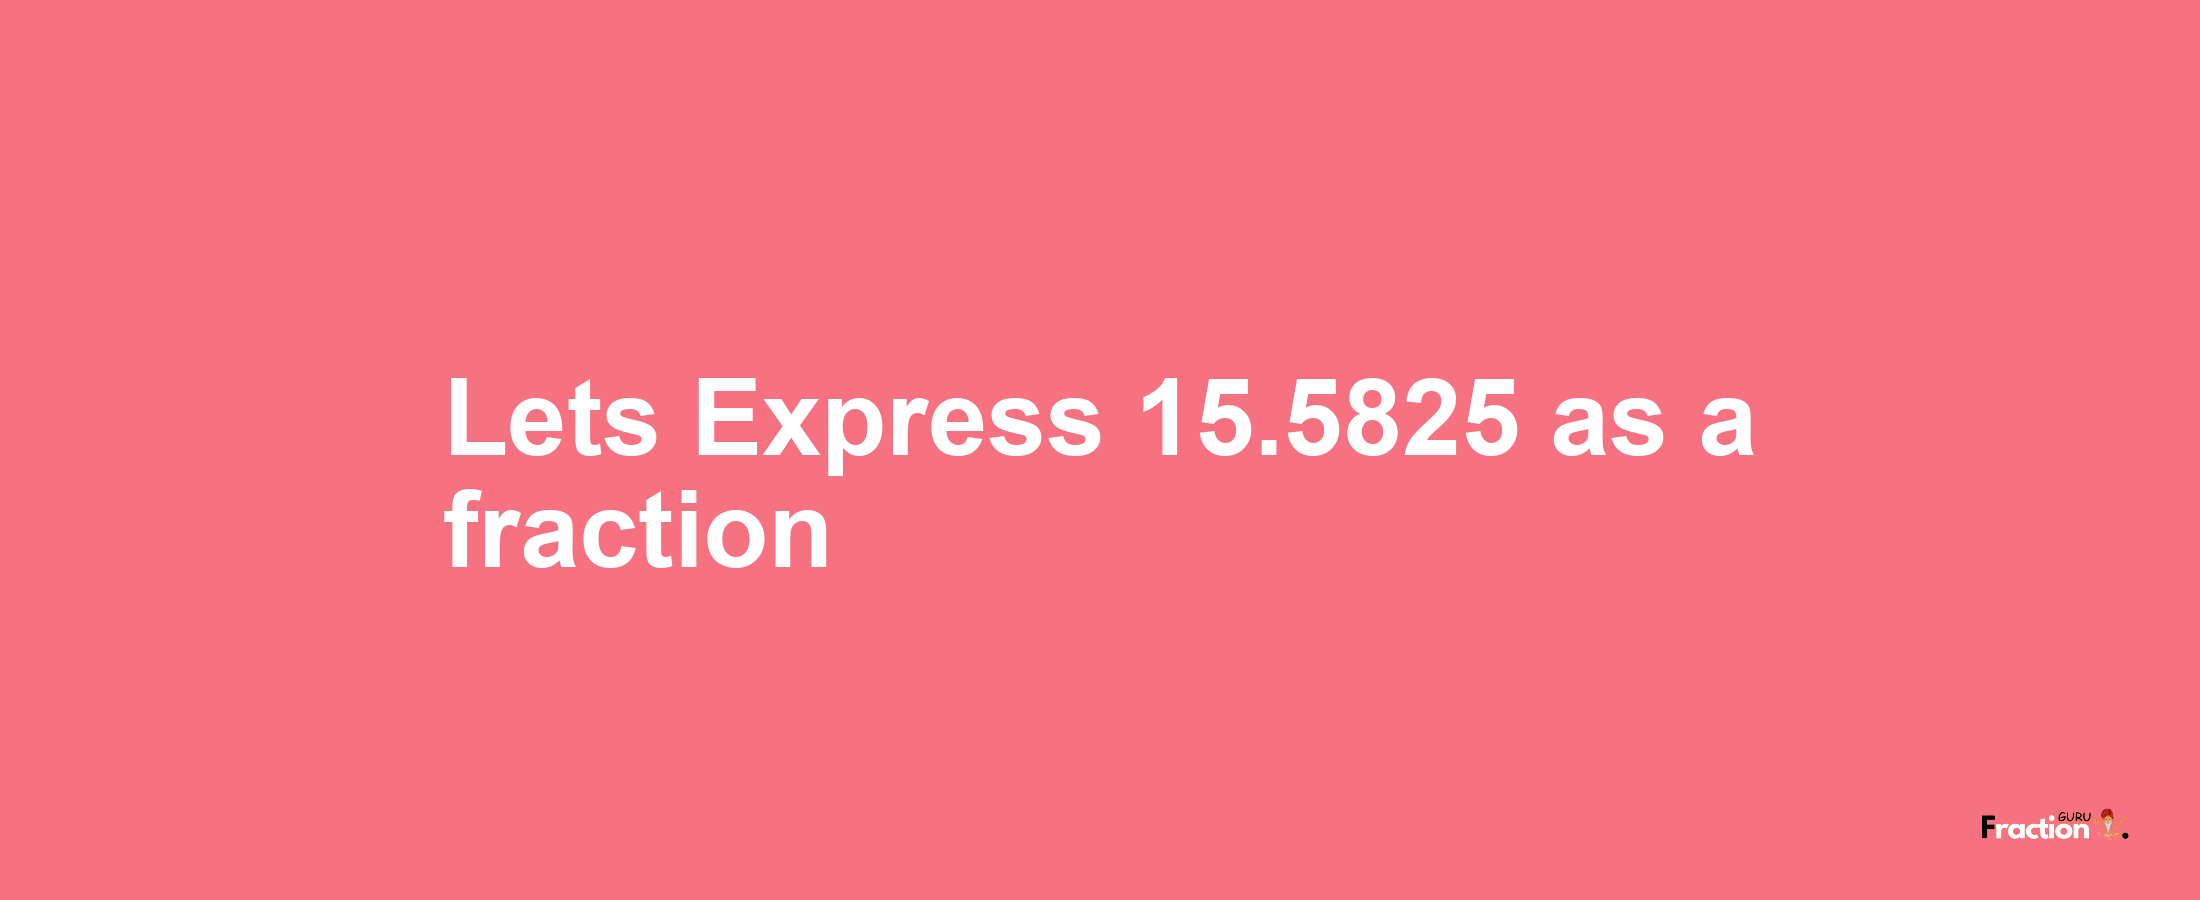 Lets Express 15.5825 as afraction